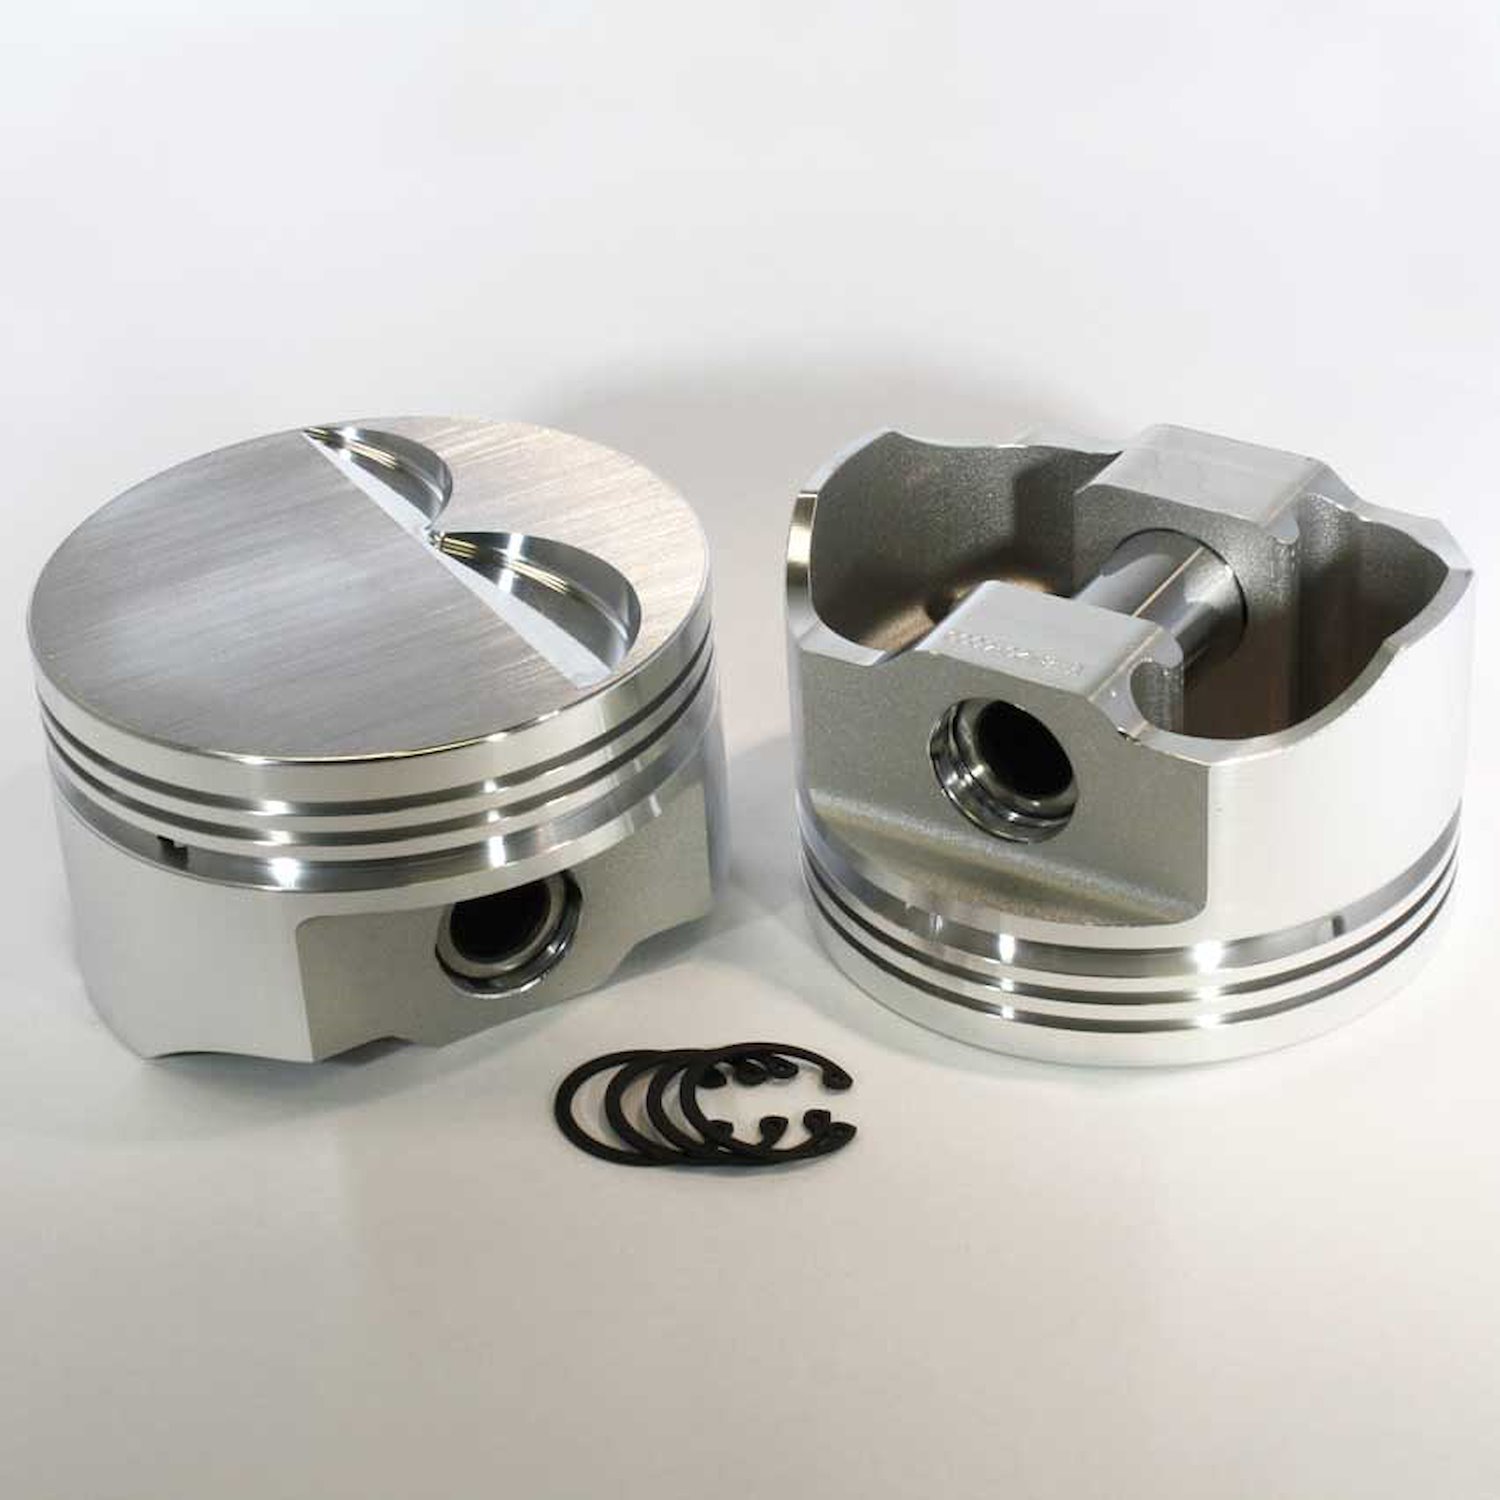 8770-3898 E-Series Flat Top Piston Set for 1997-2005 Chevy LS, 3.898 in. Bore, -3cc Volume [OEM Stroke]